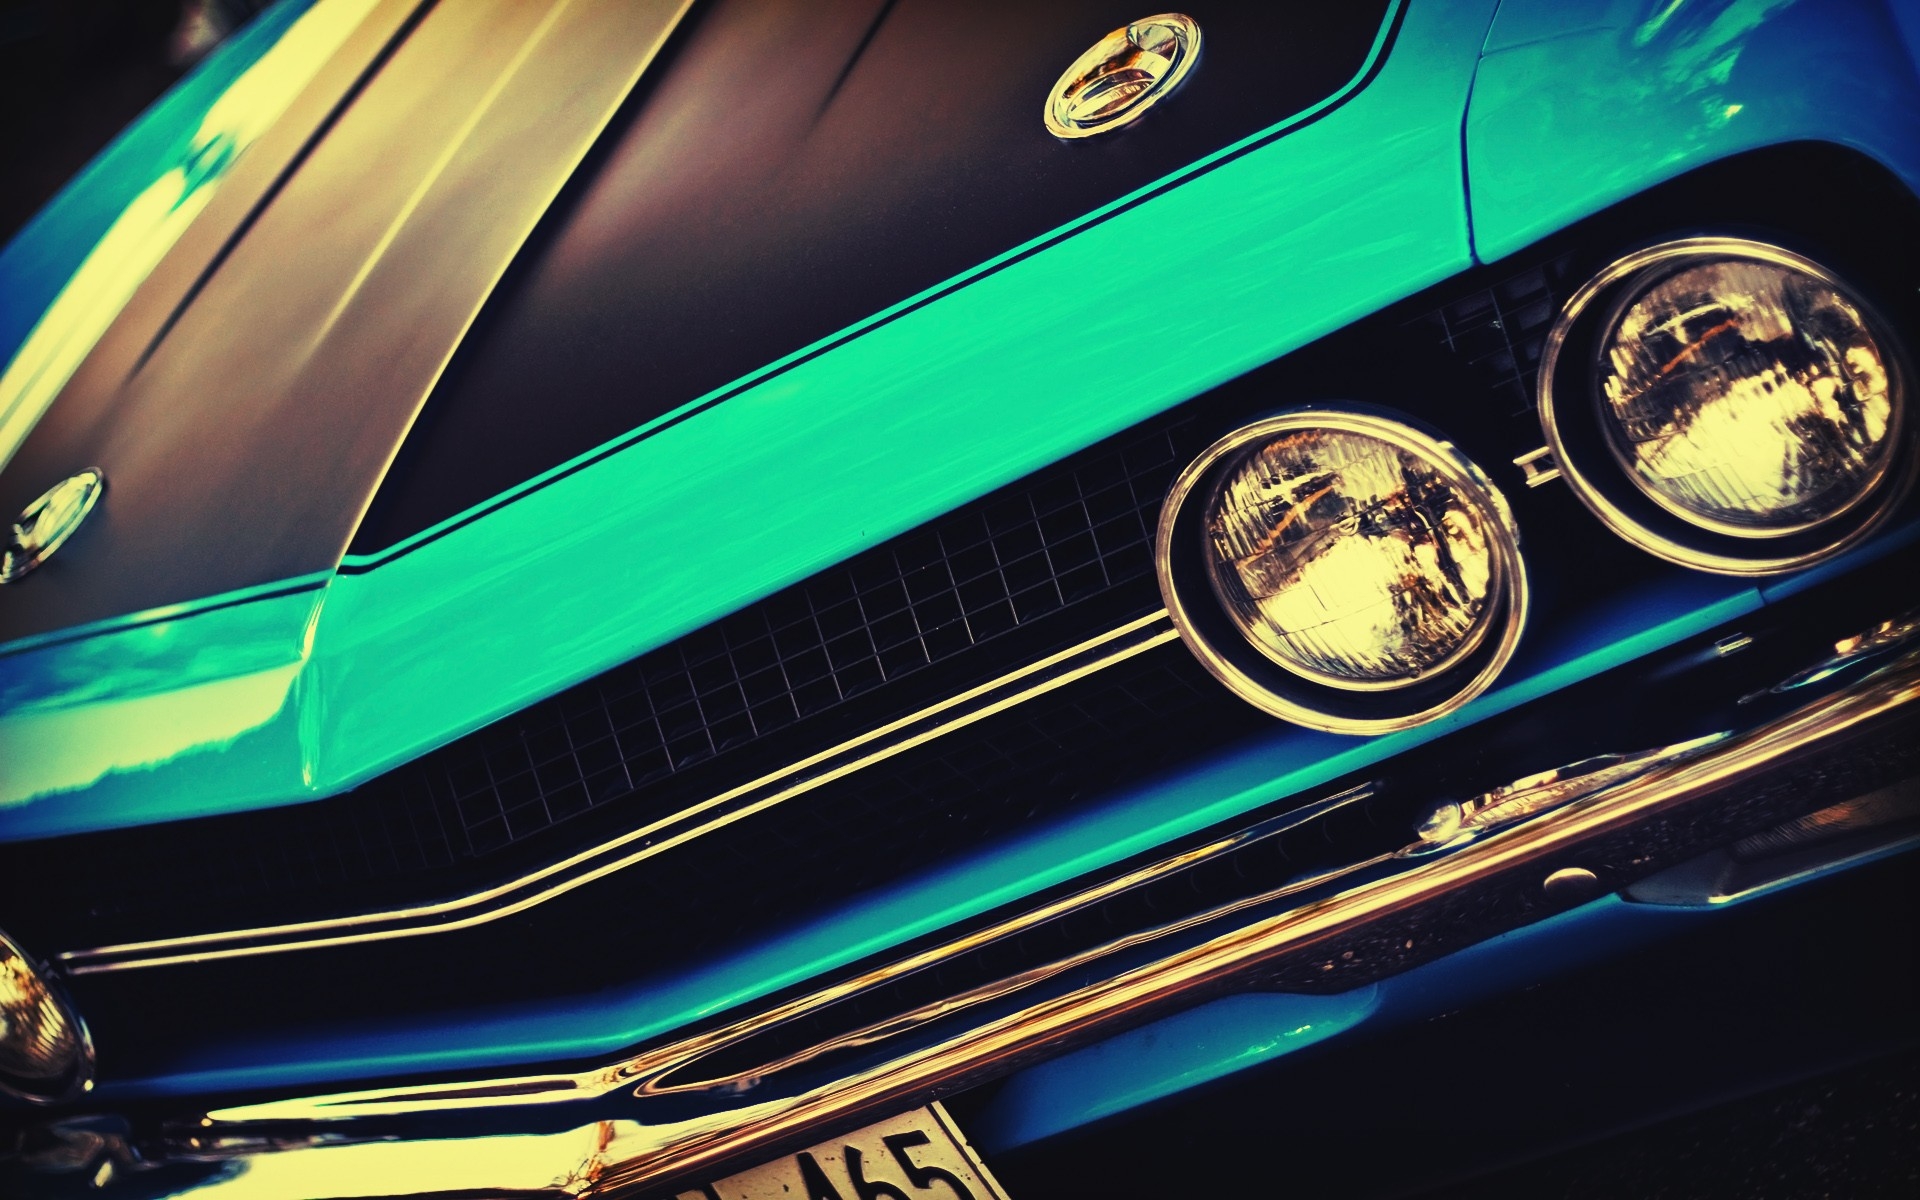 blue, Vintage, Cars, Muscle, Cars, Usa, Vintage, Cars, American, Cars Wallpaper